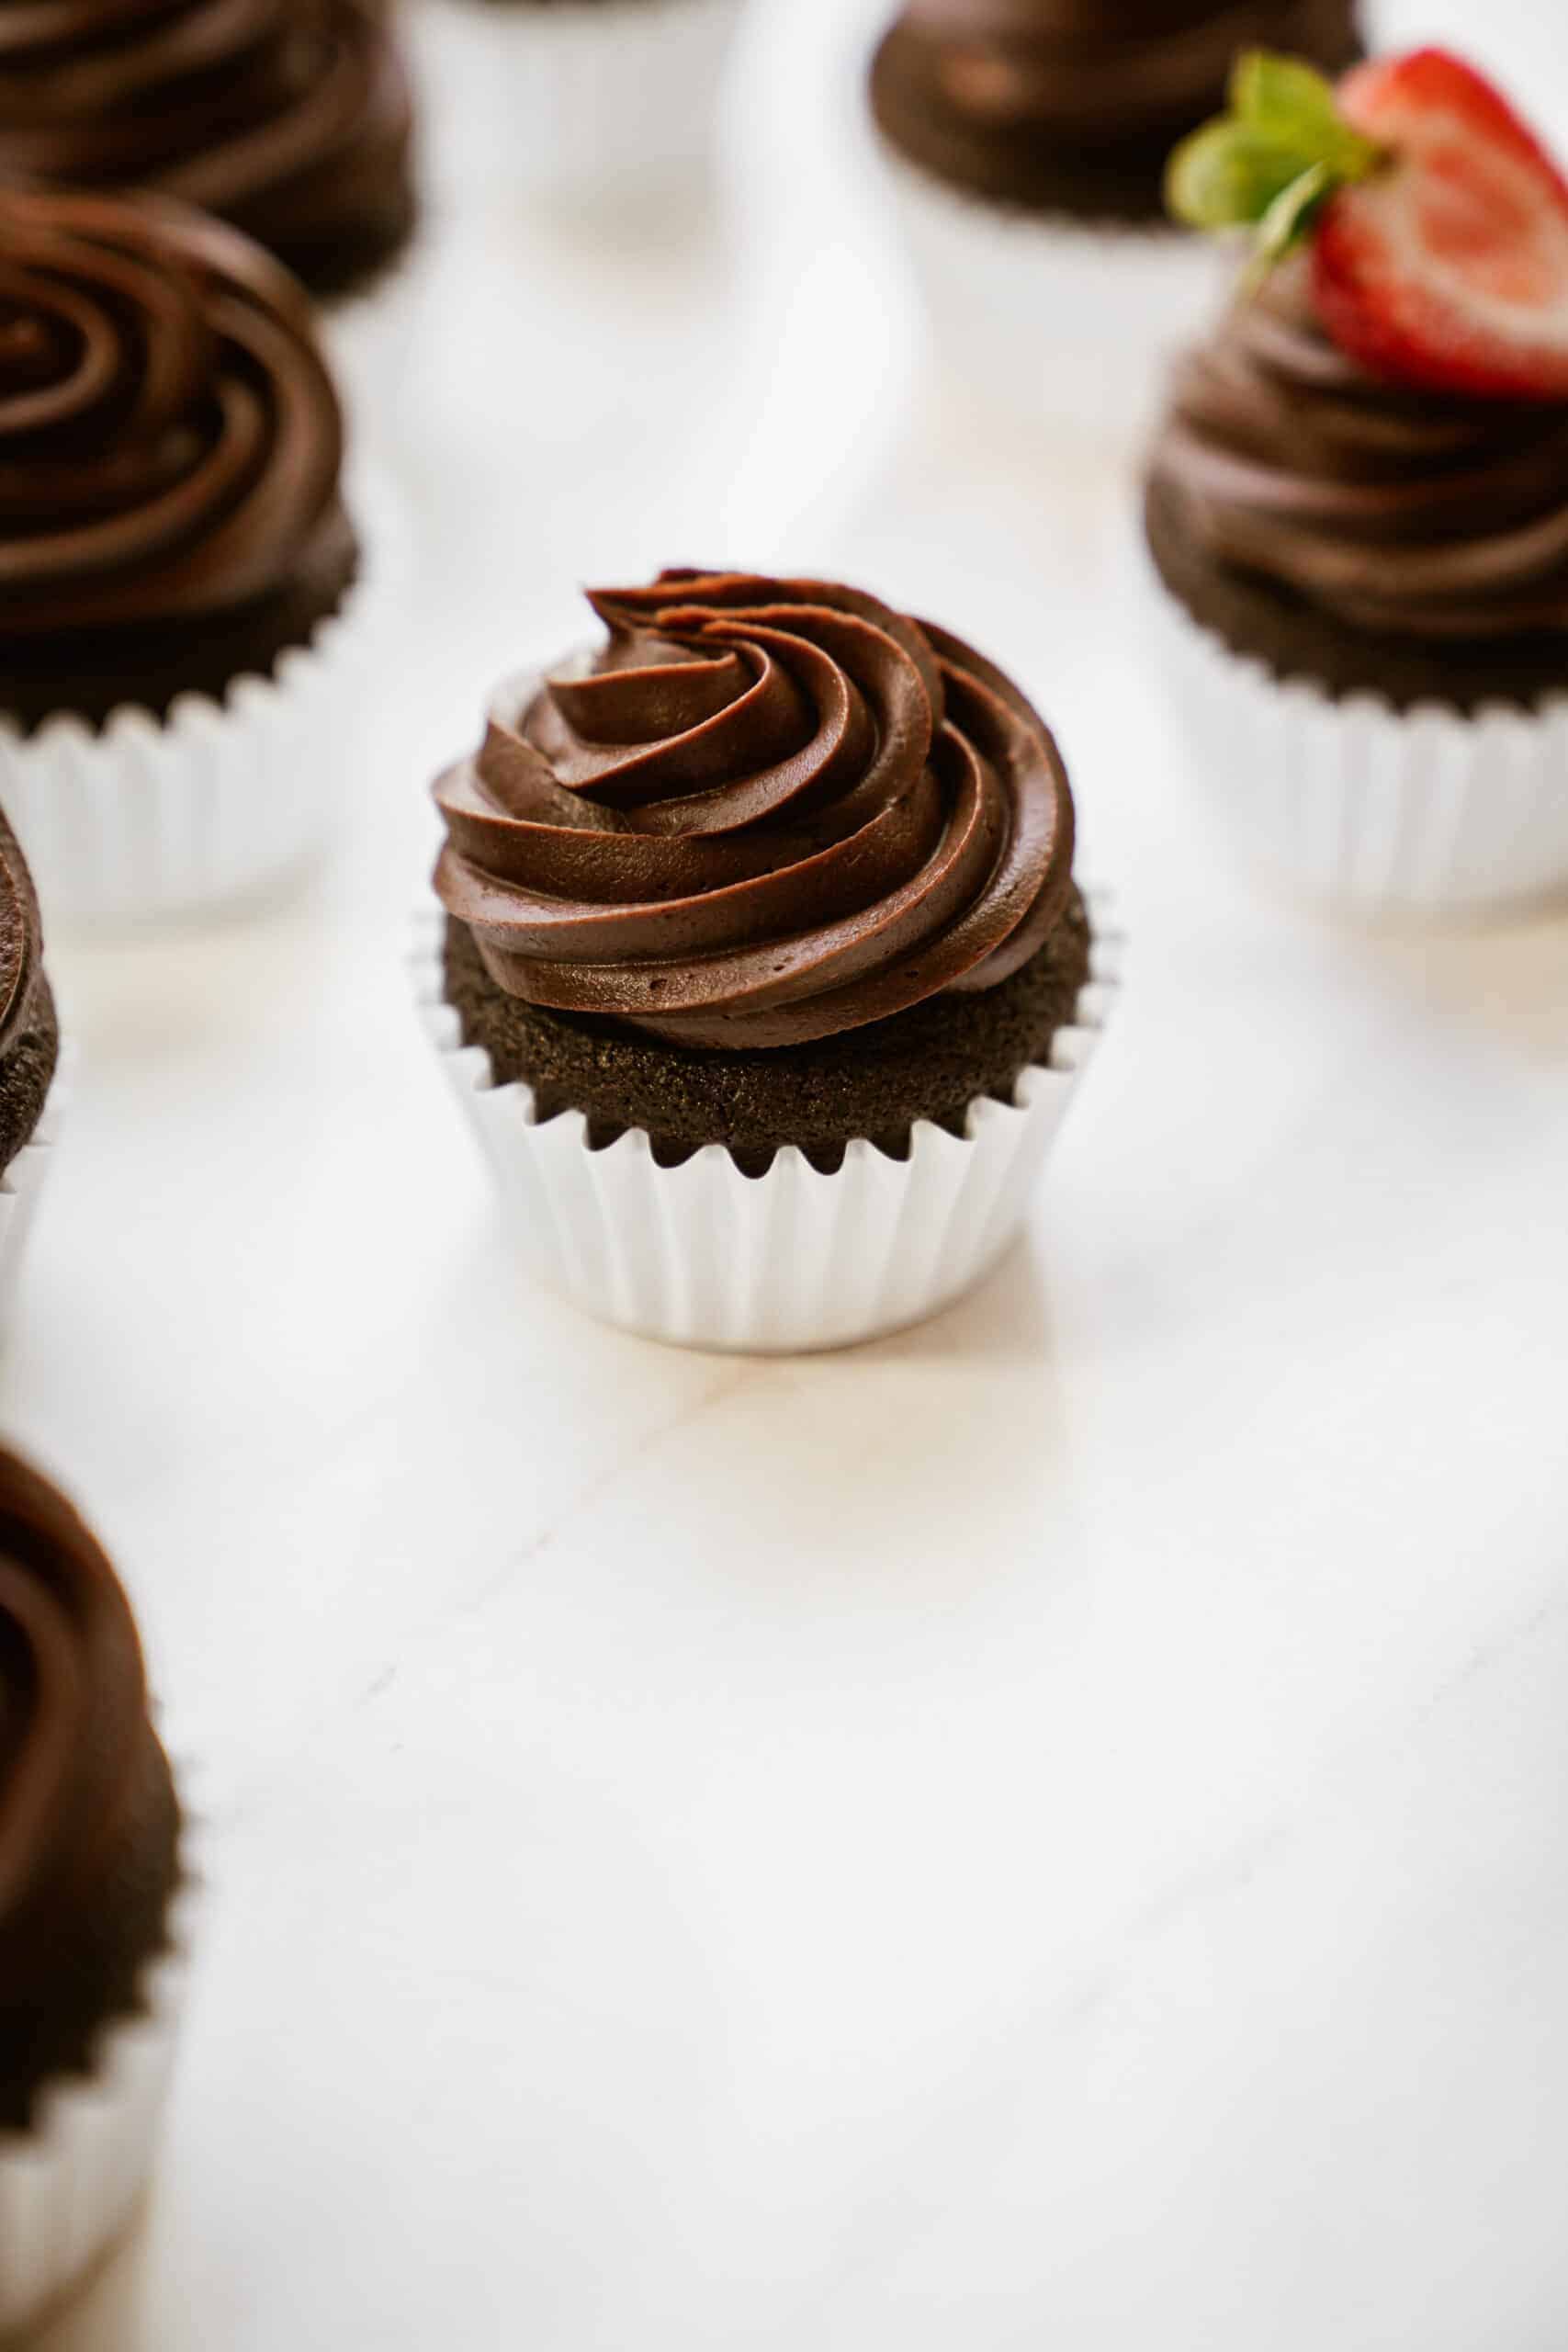 Gluten-free chocolate cupcakes on a white counter